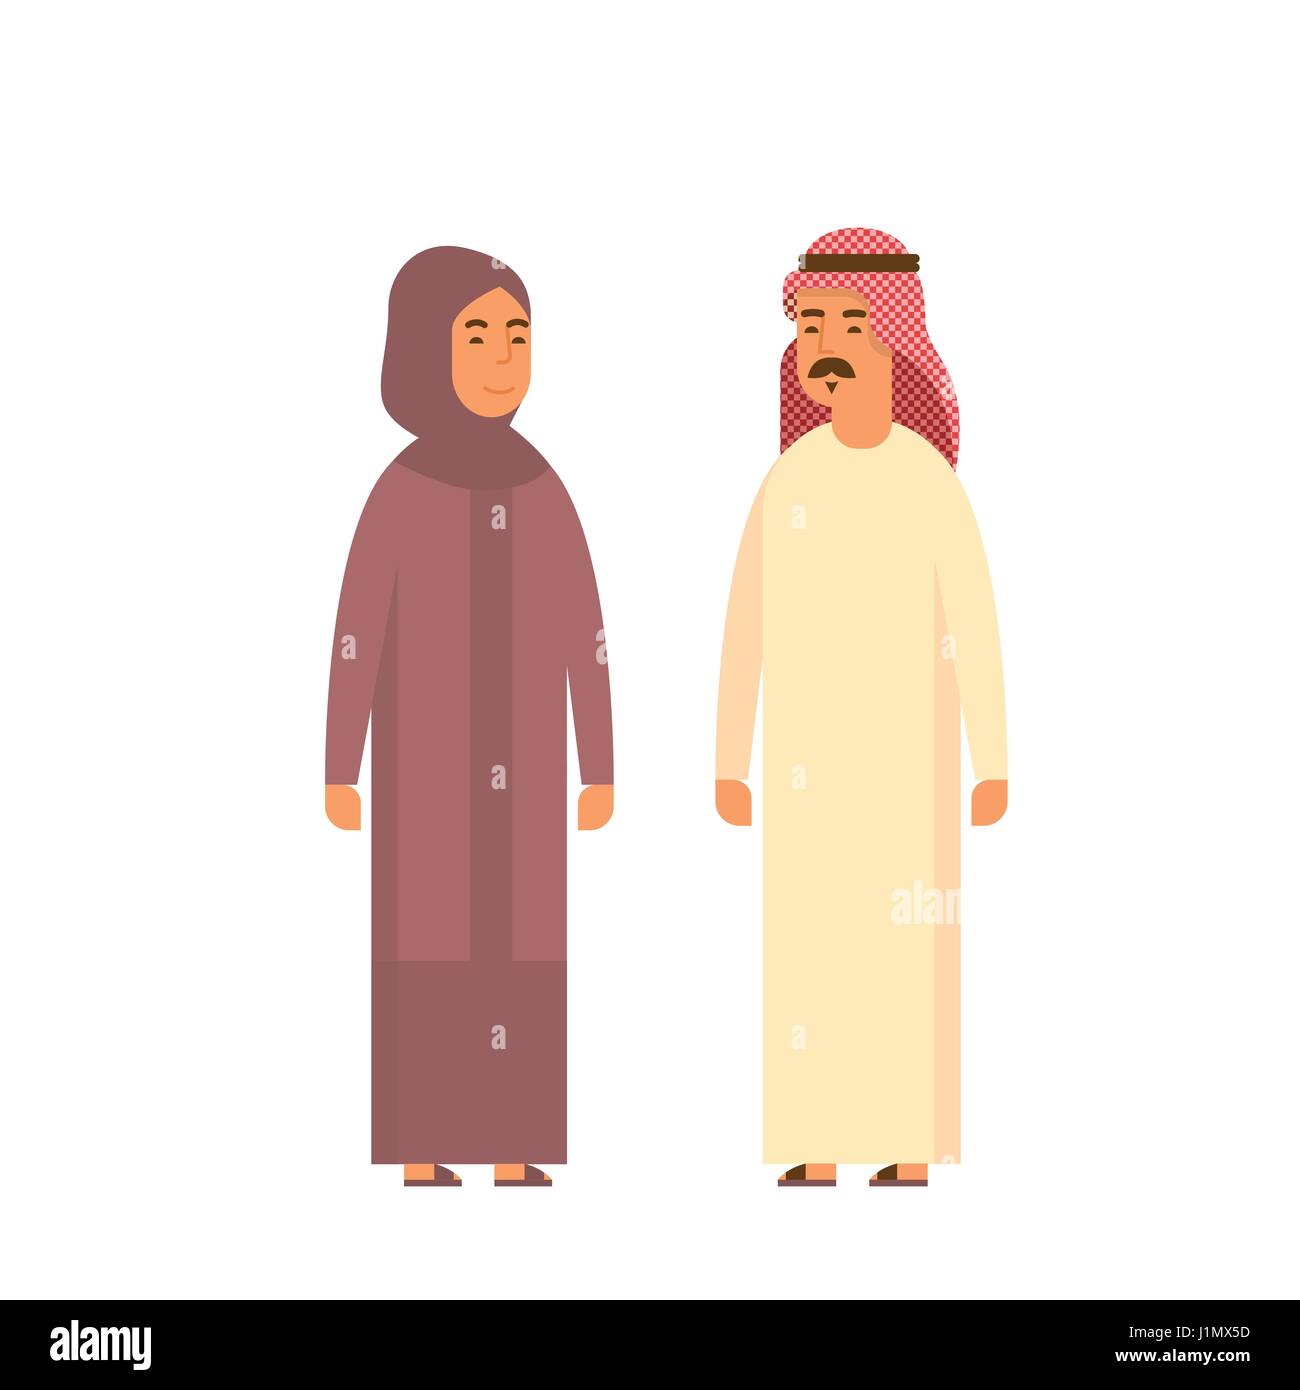 Muslim Couple People Talking Business Man and Woman Traditional Clothes Arabic Stock Vector